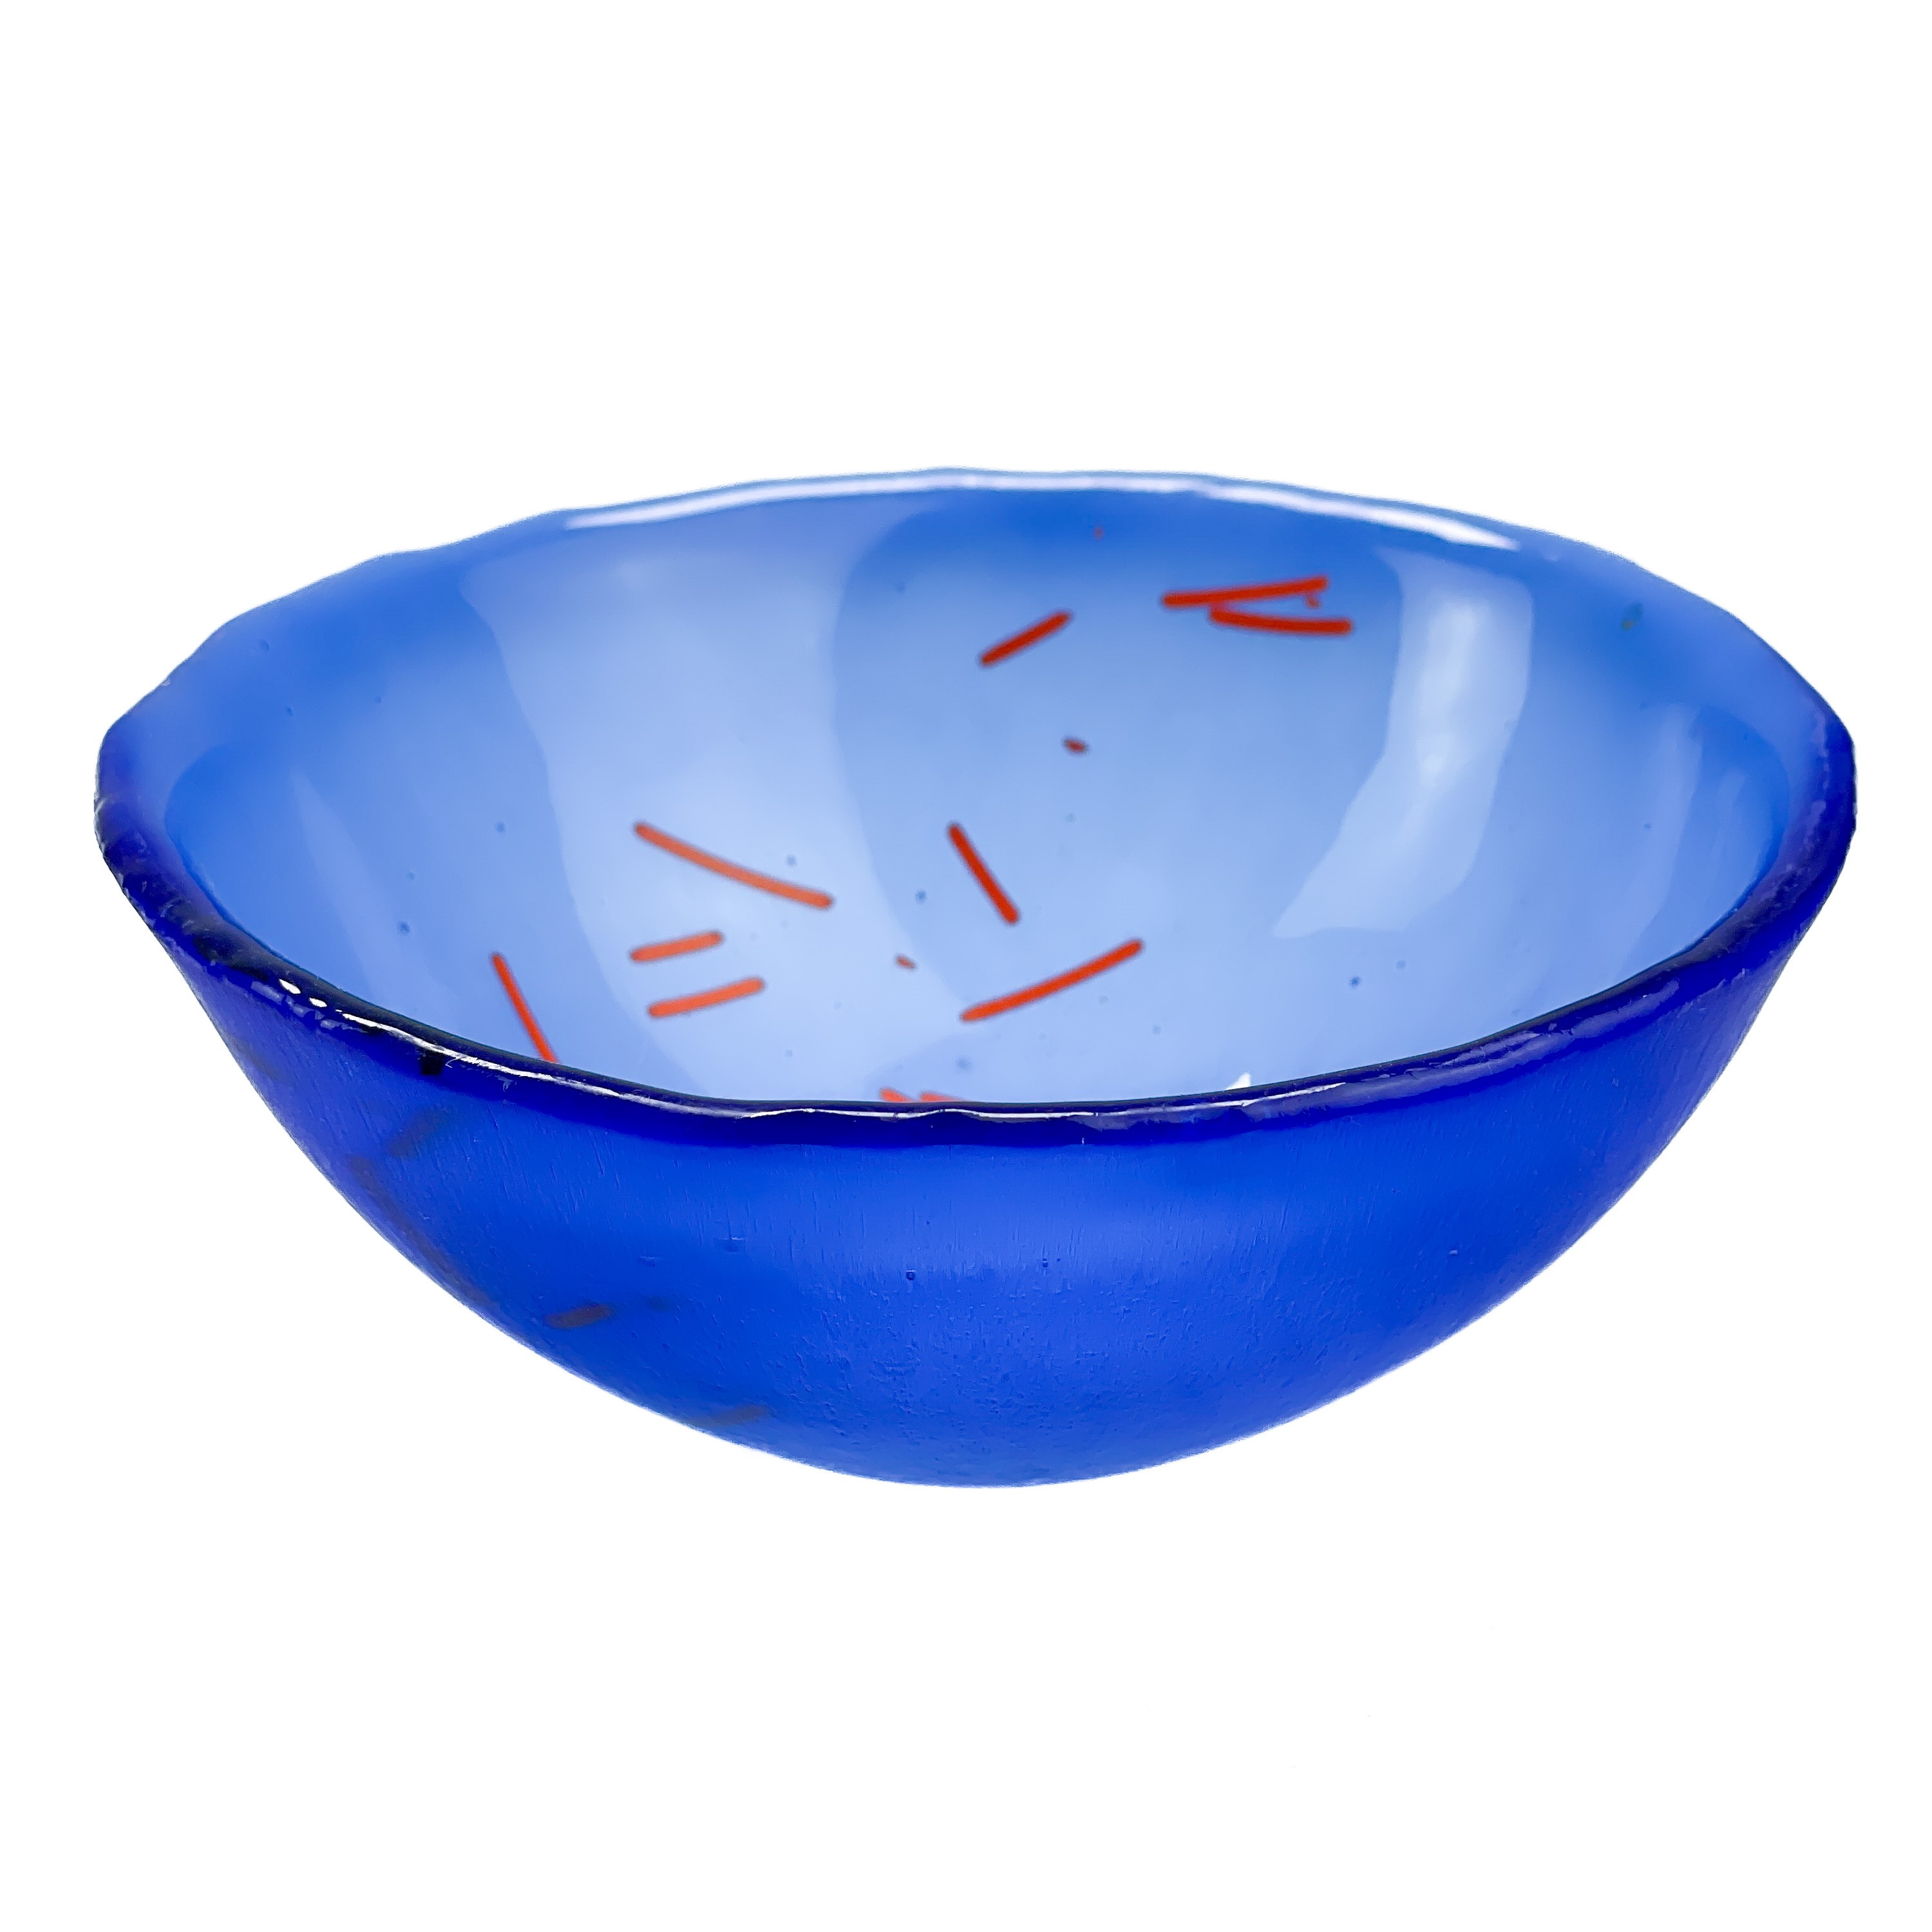 Serena RADCLIFFE Eight Glass Art Bowls - Image 5 of 18